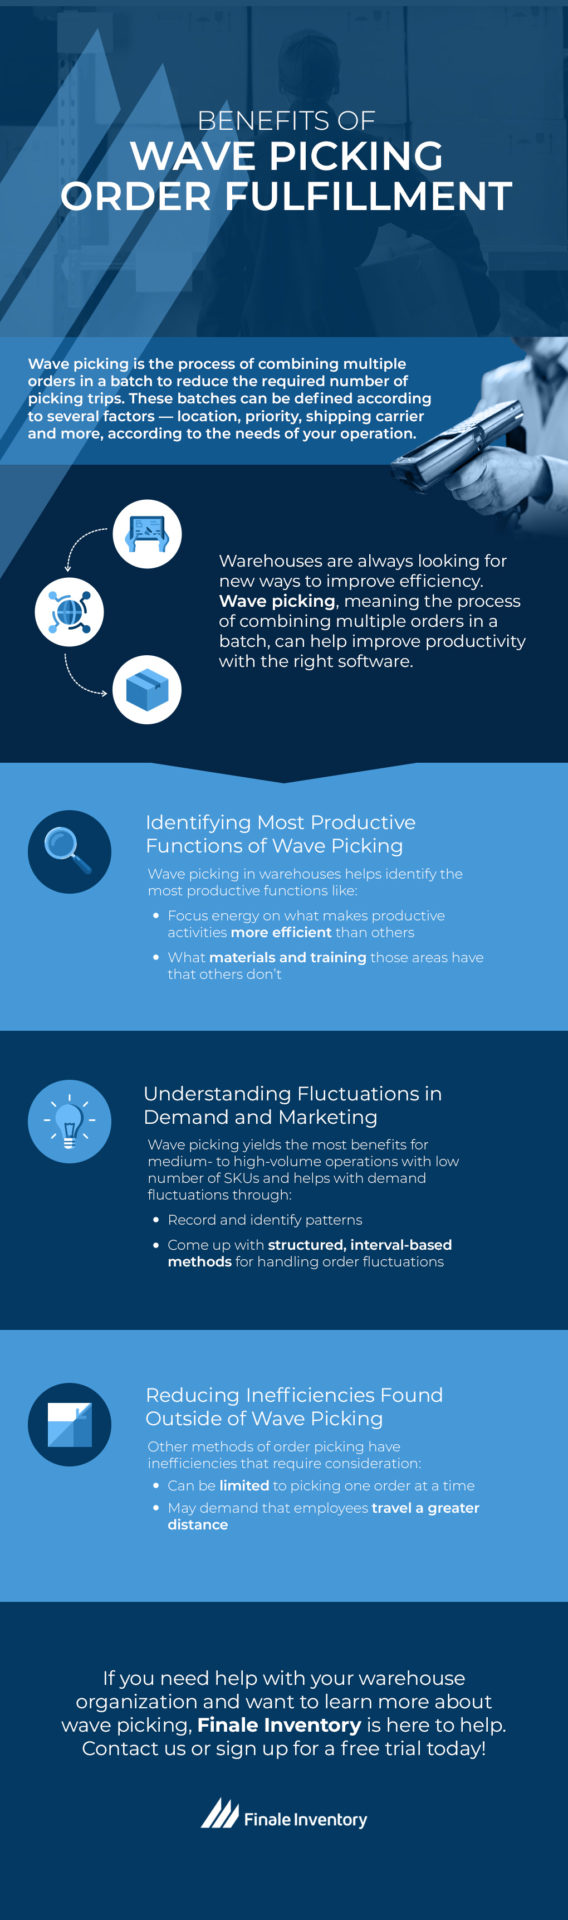 benefits of wave picking order fulfillment